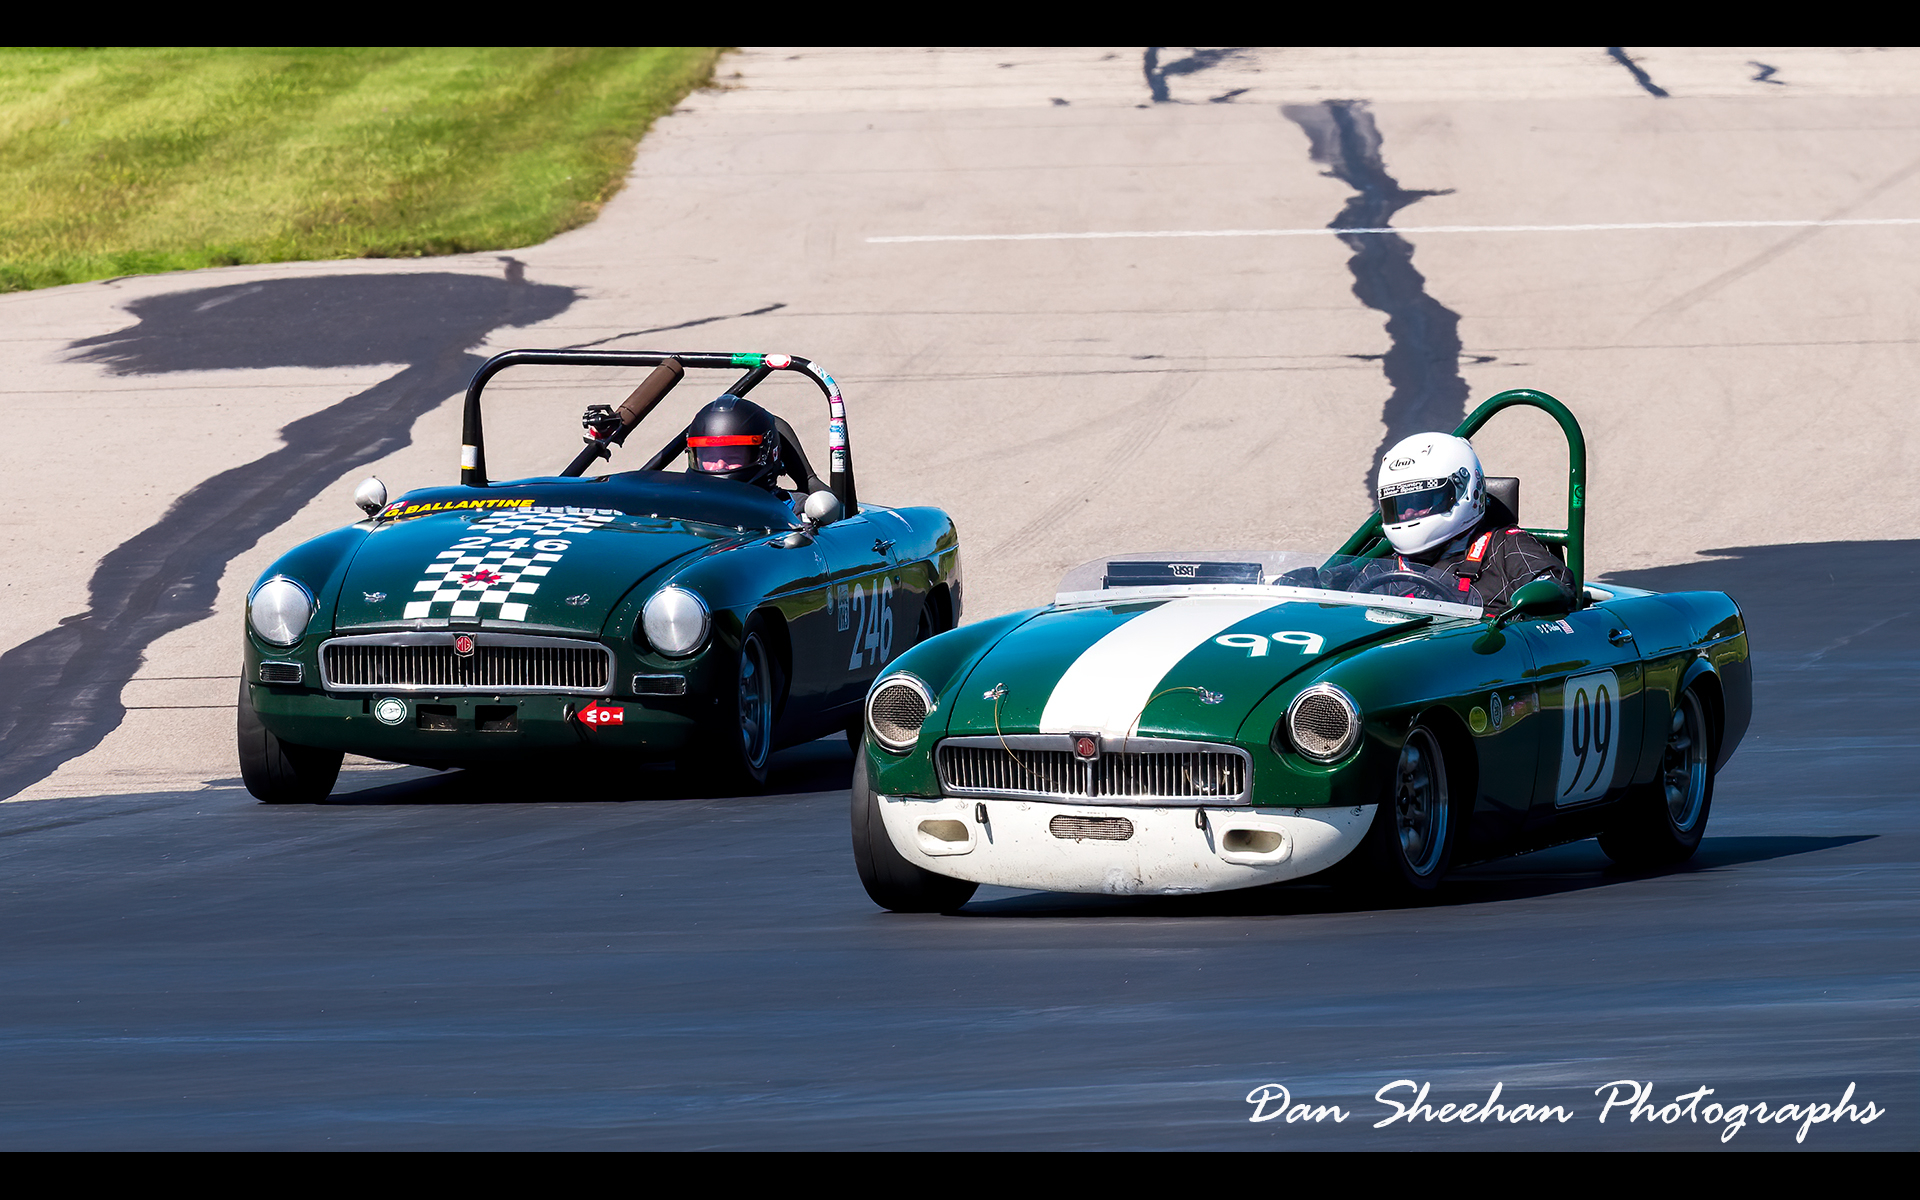 British sports cars participating in the VSCDA event at Grattan Raceway Park in Michigan. : Cars : Dan Sheehan Photographs - Fine Art Stock Photography